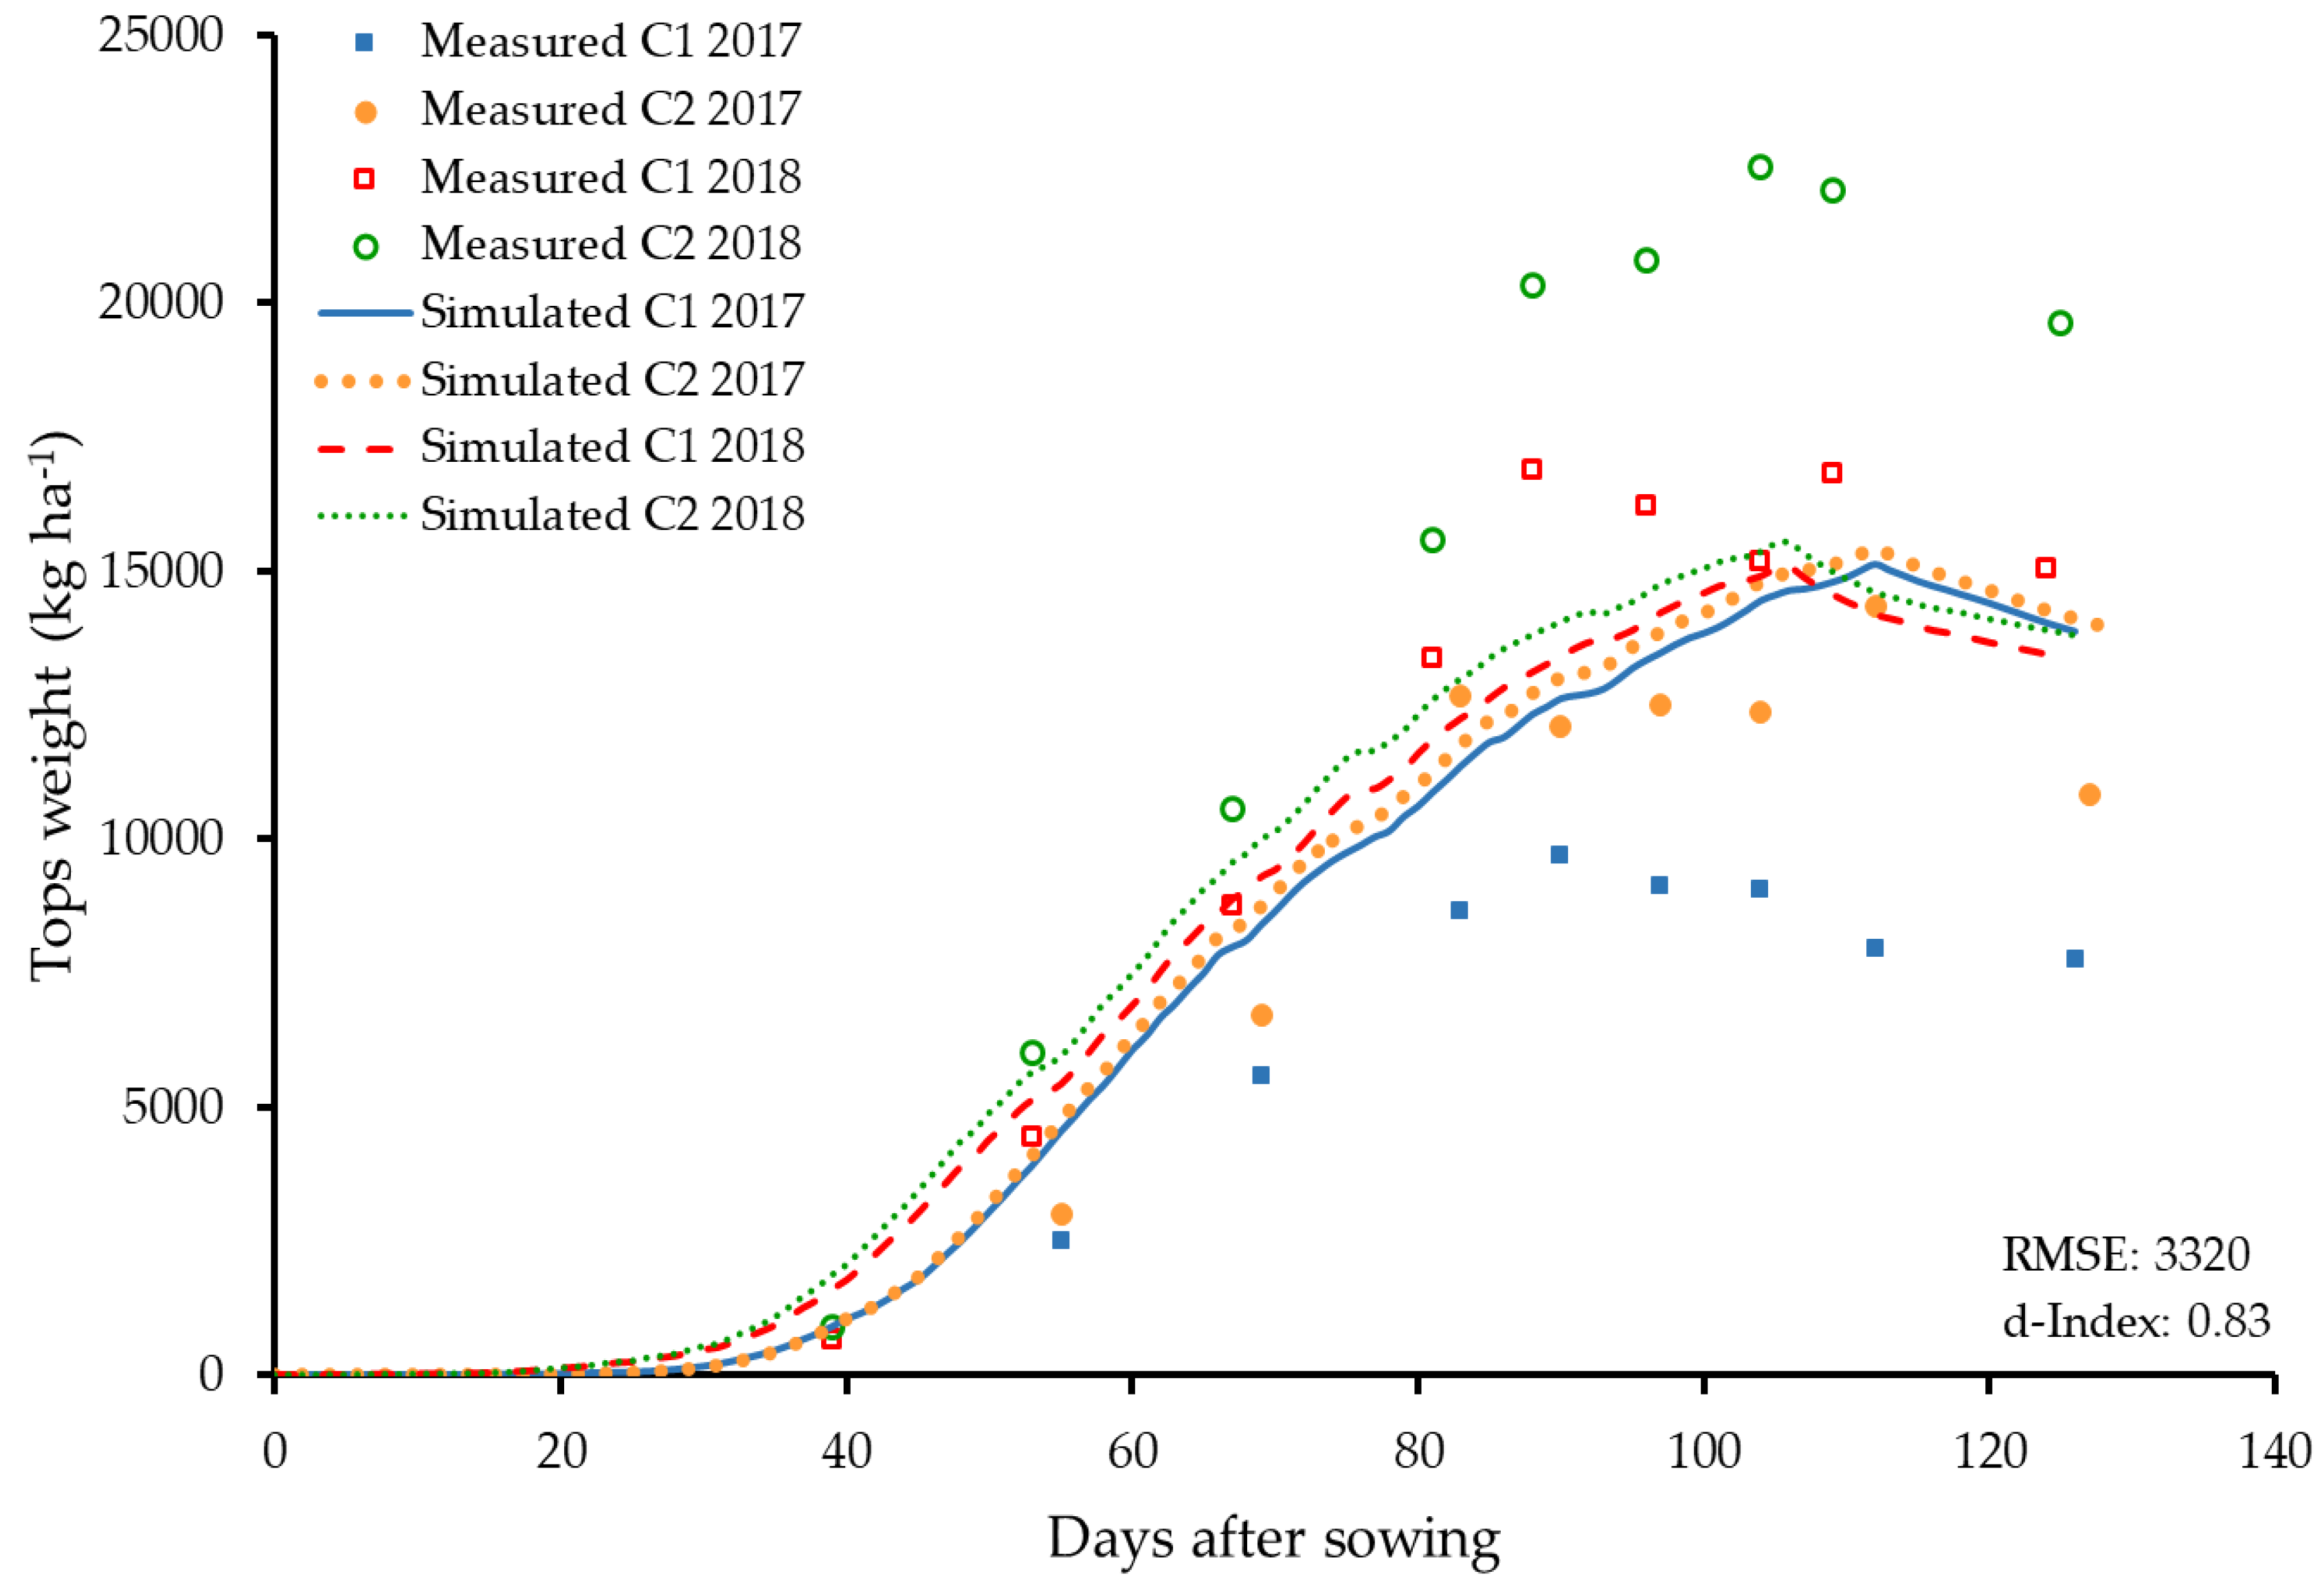 Agronomy | Free Full-Text | Modifying the CROPGRO Safflower Model to  Simulate Growth, Seed and Floret Yield under Field Conditions in  Southwestern Germany | HTML